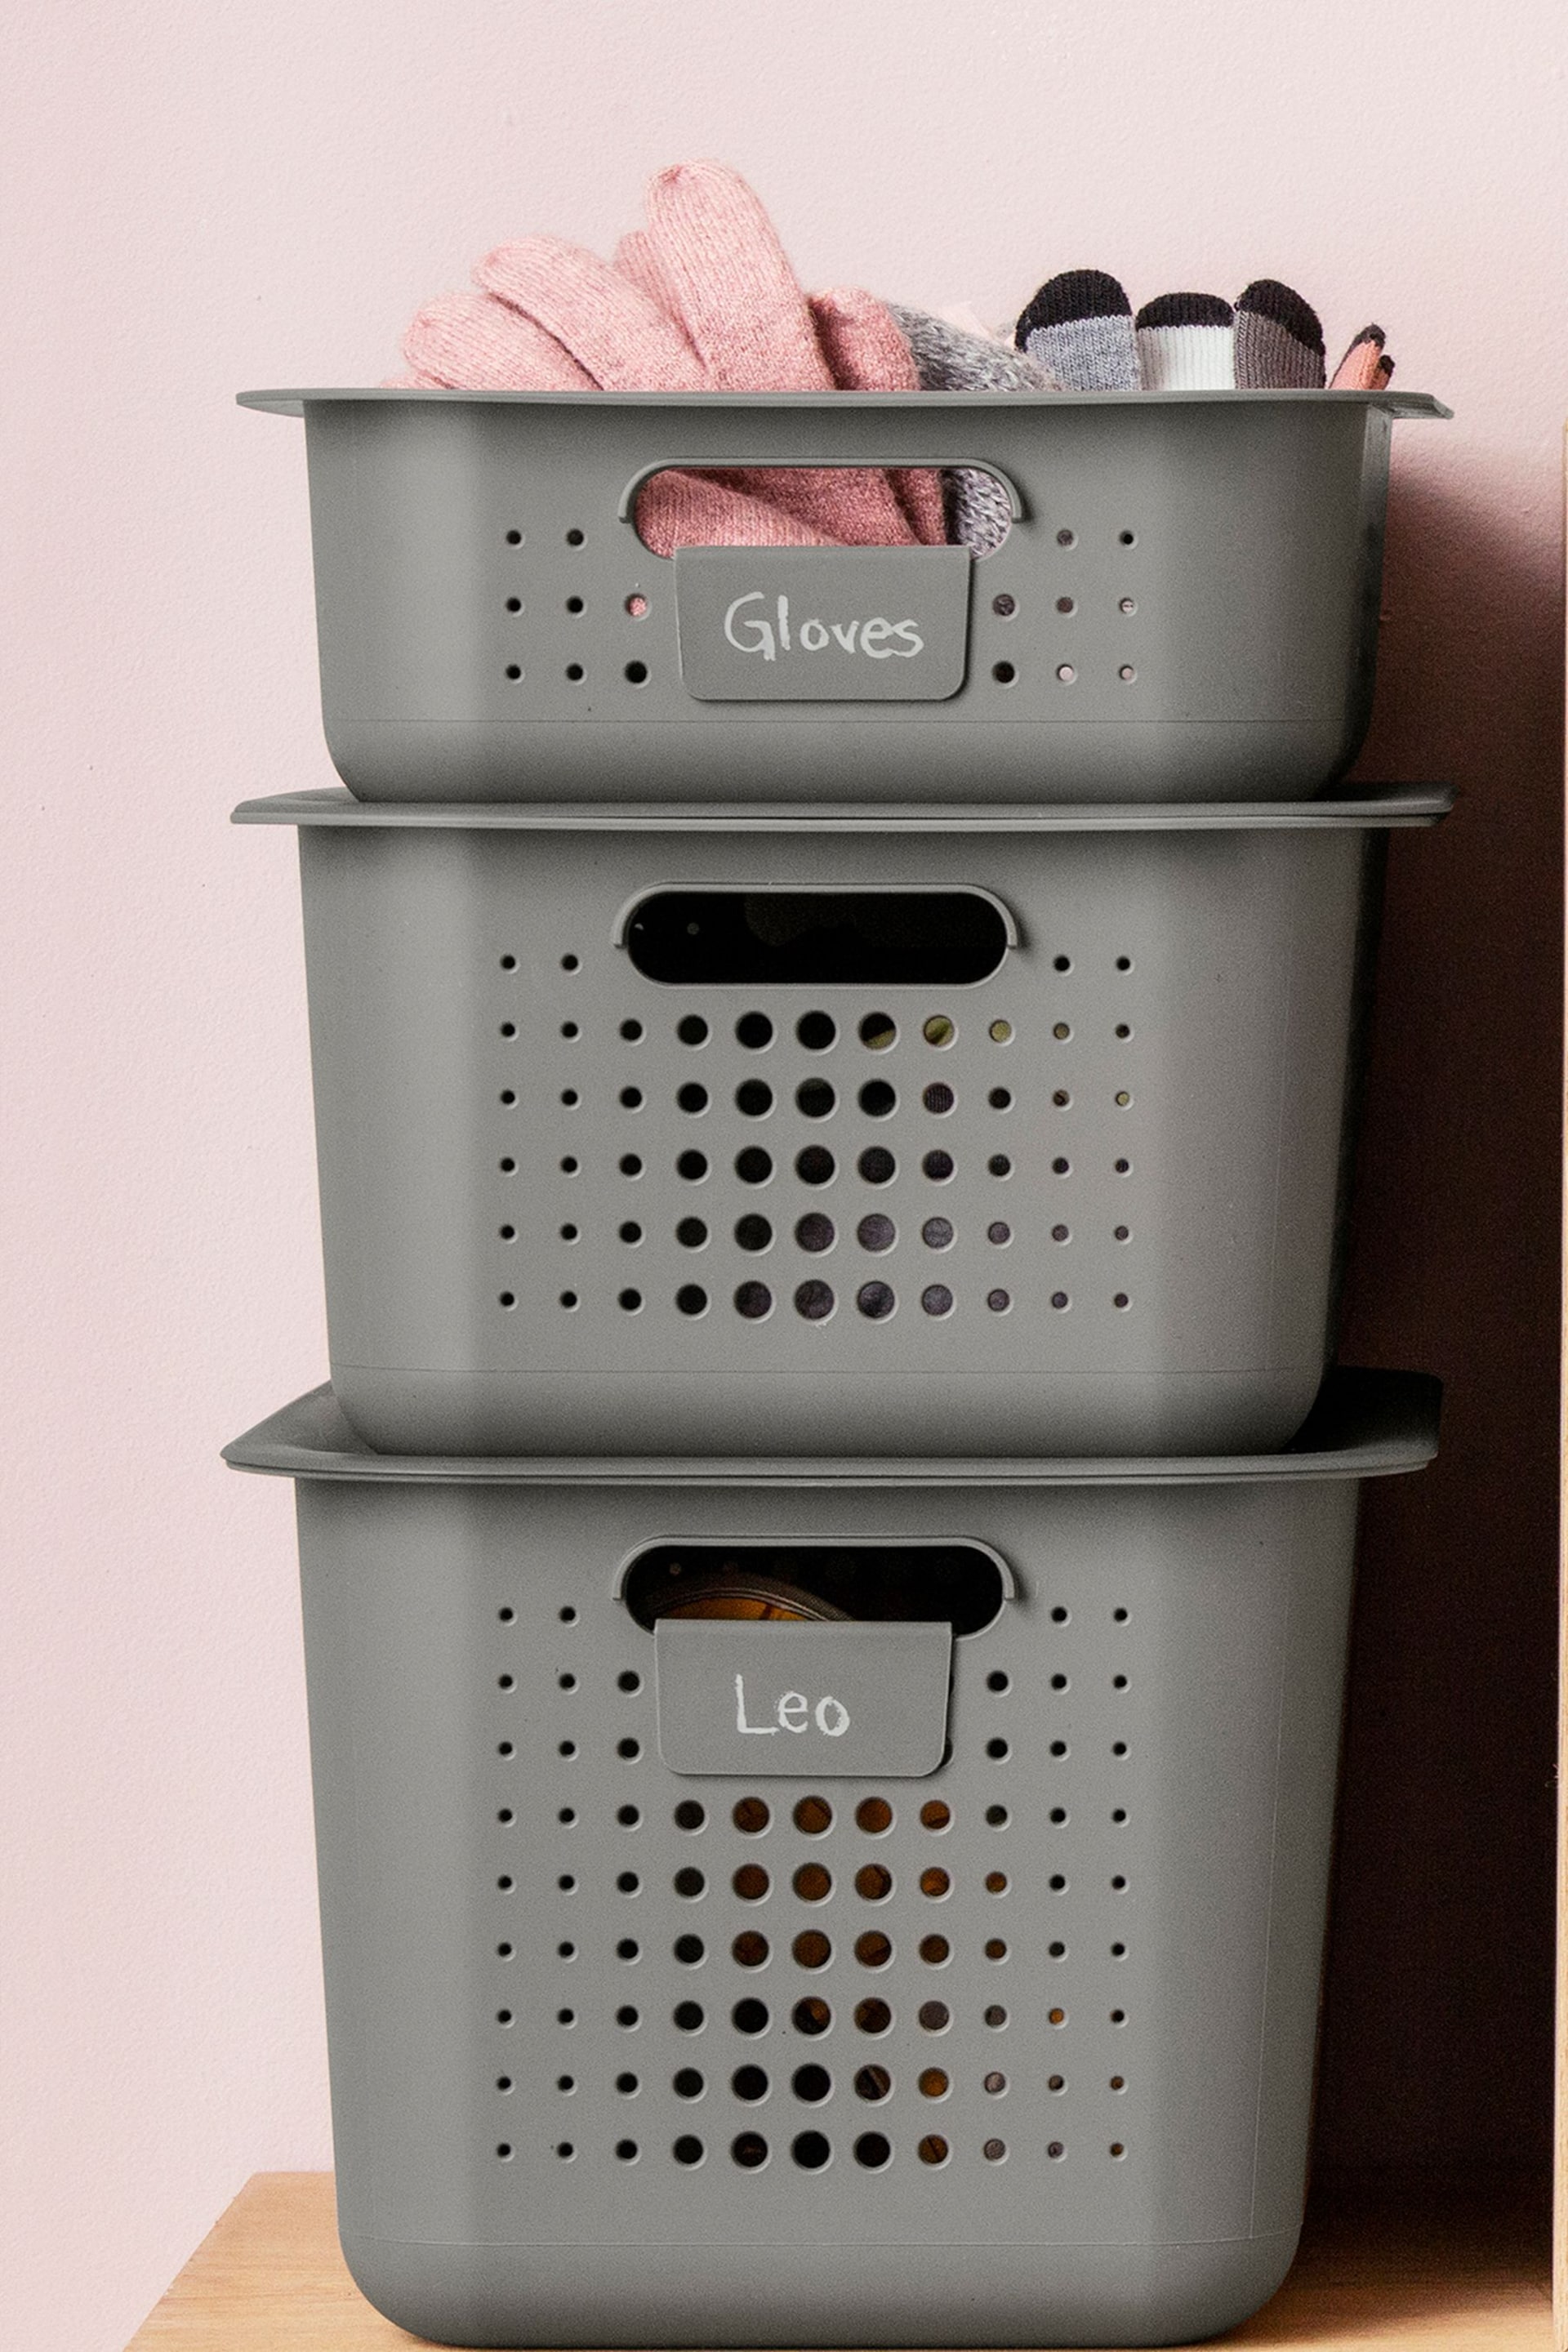 Orthex Grey Smartstore Set of 4 10L Baskets With Lids - Image 2 of 6